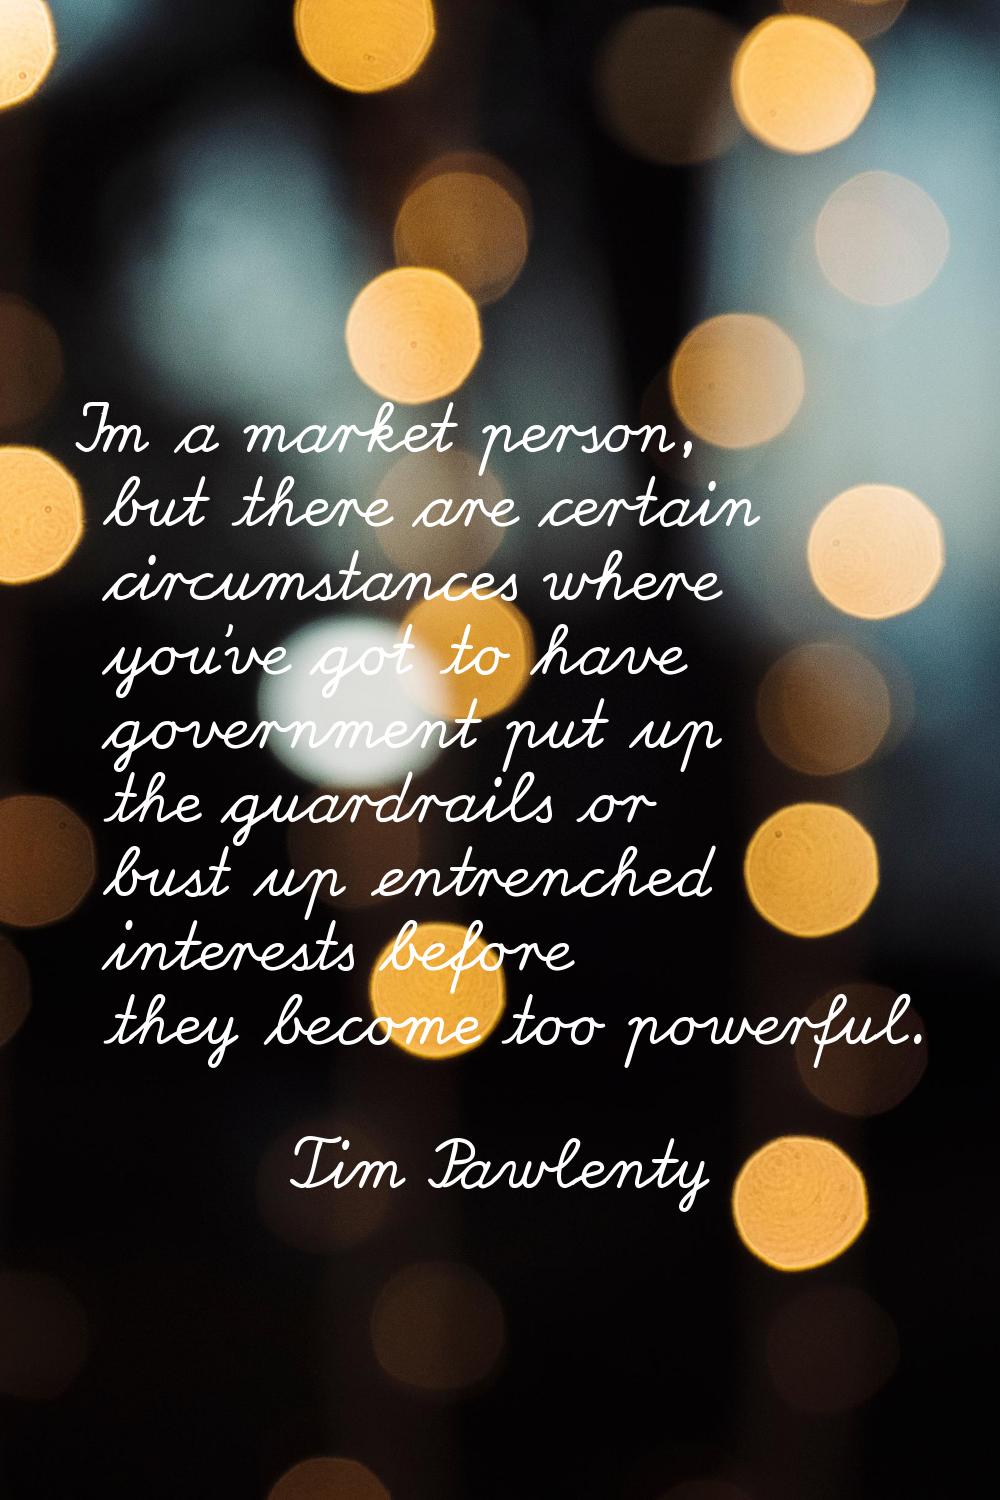 I'm a market person, but there are certain circumstances where you've got to have government put up